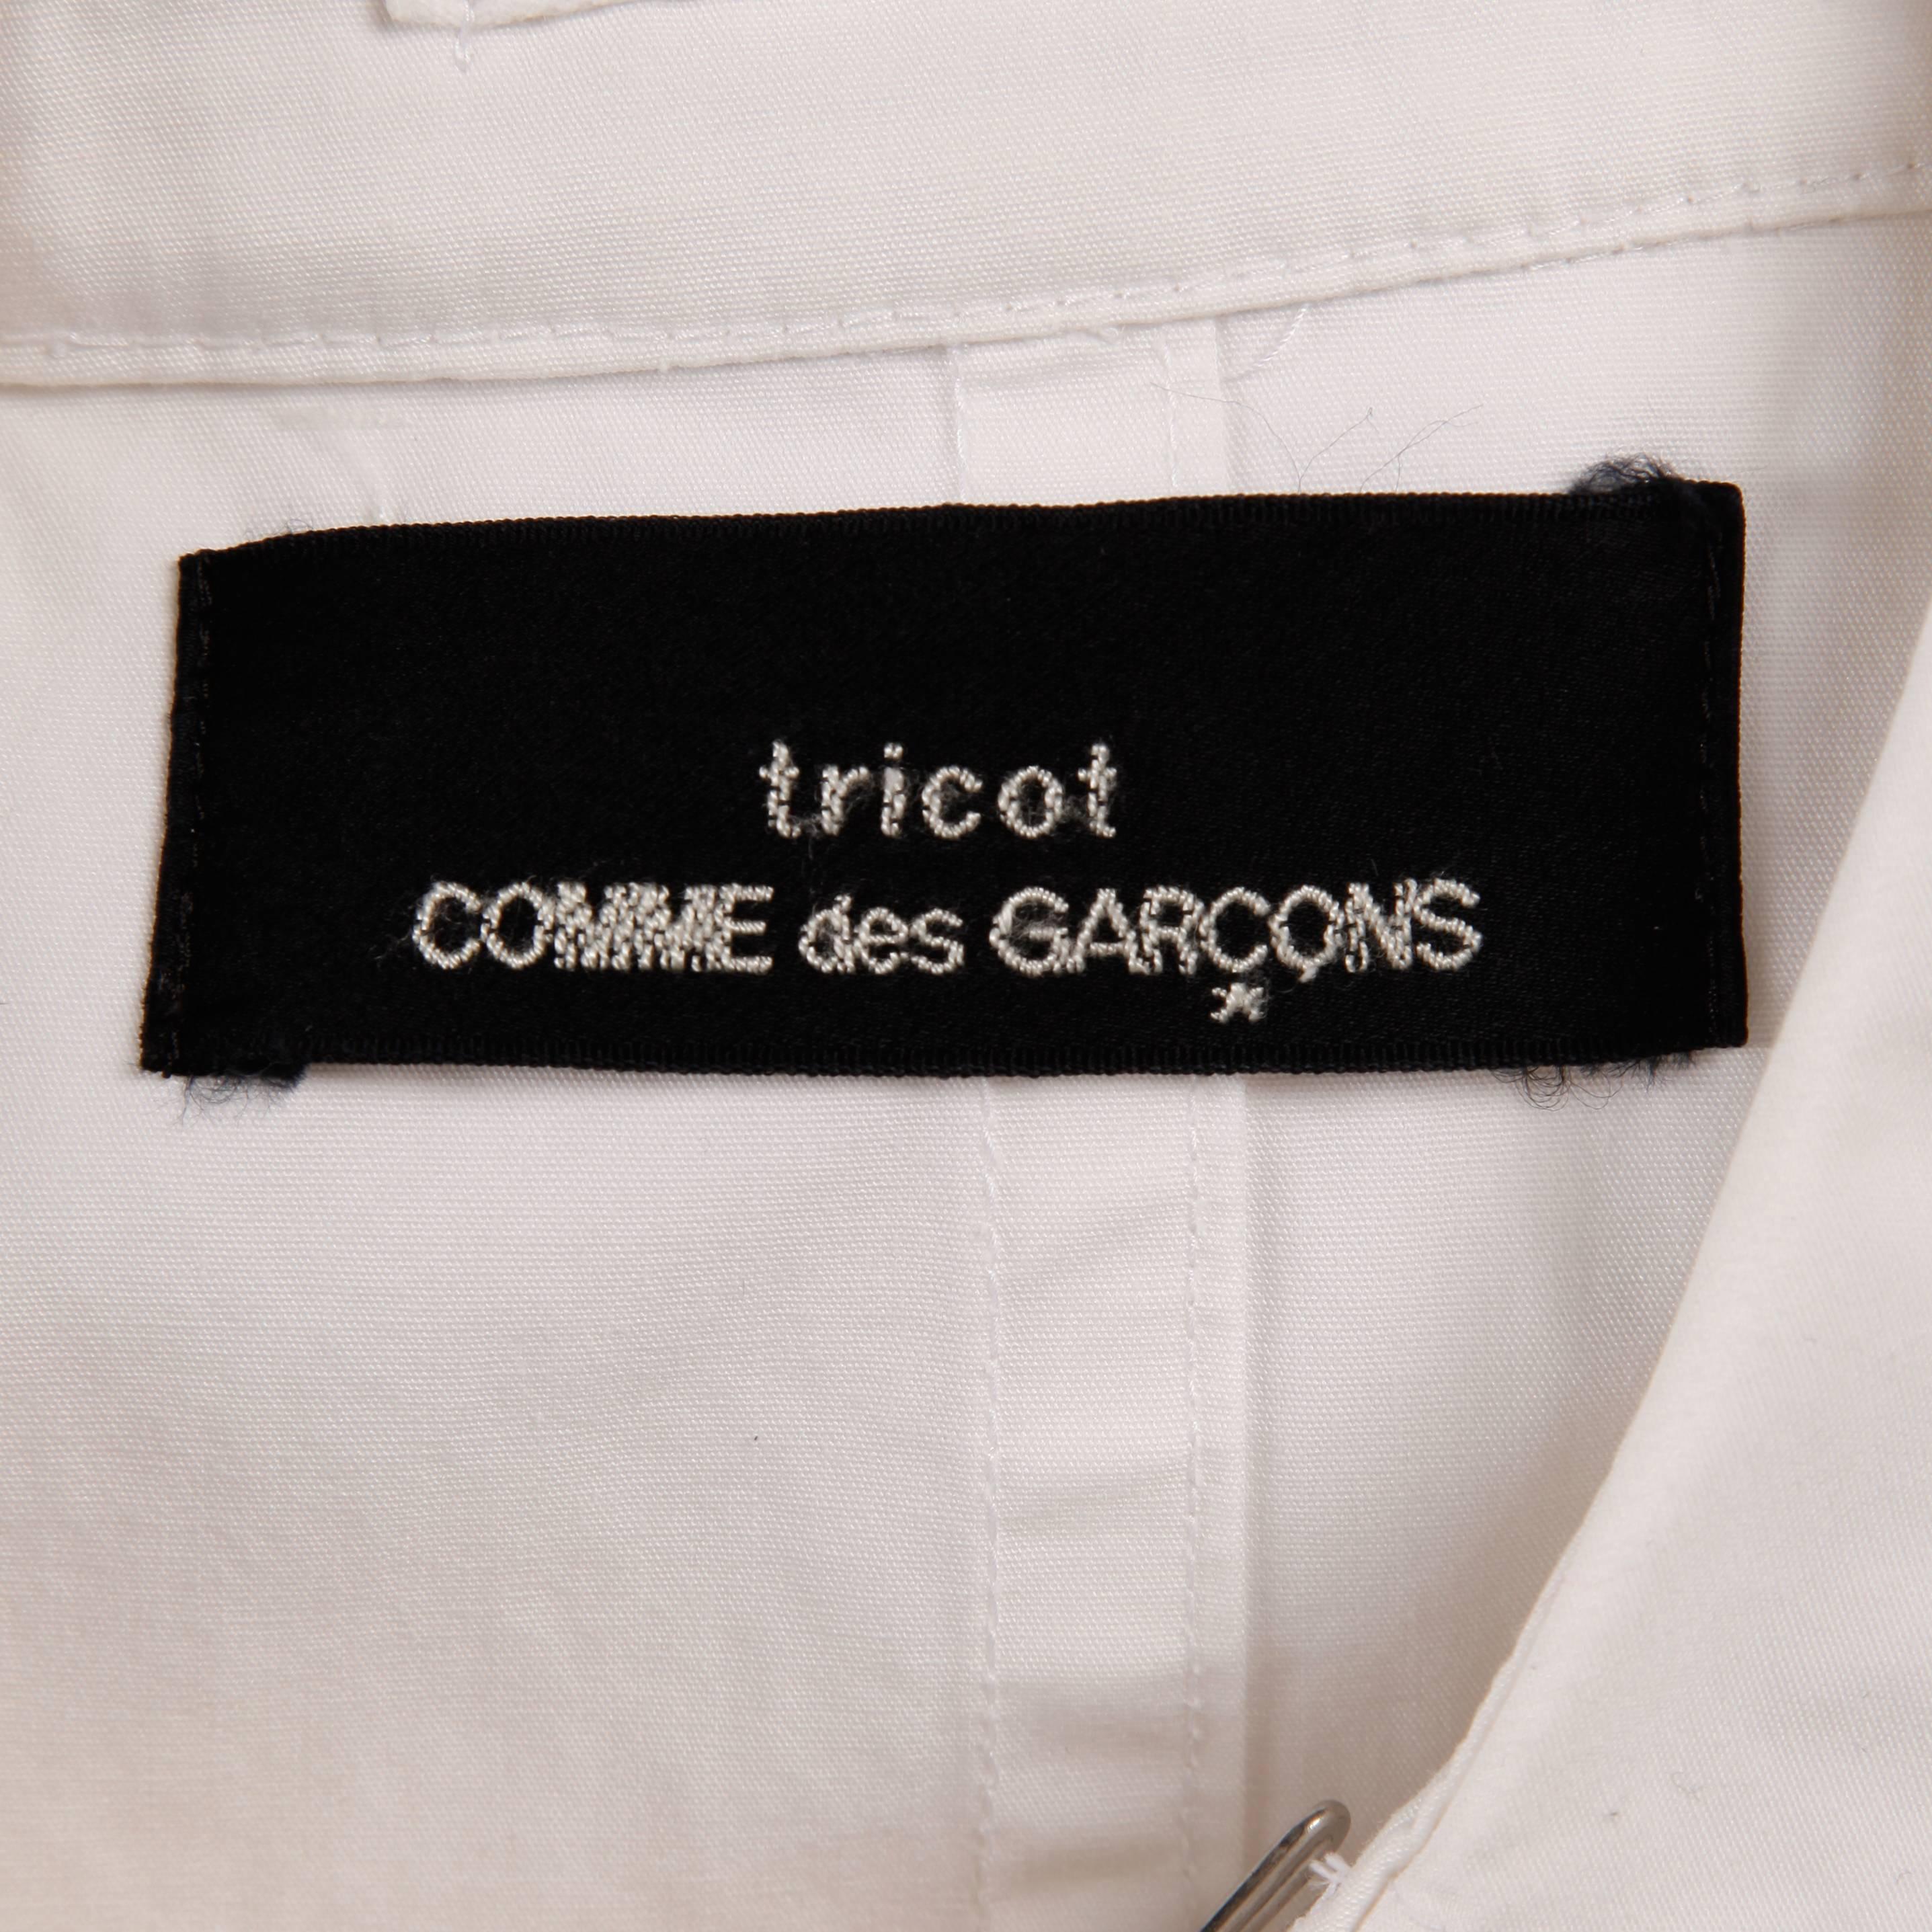 Vintage Comme des Garcons white cotton double breasted jacket from the 1998 collection. Hook closure at the collar. Unlined. The jacket fits like a modern size small. The bust measures 36